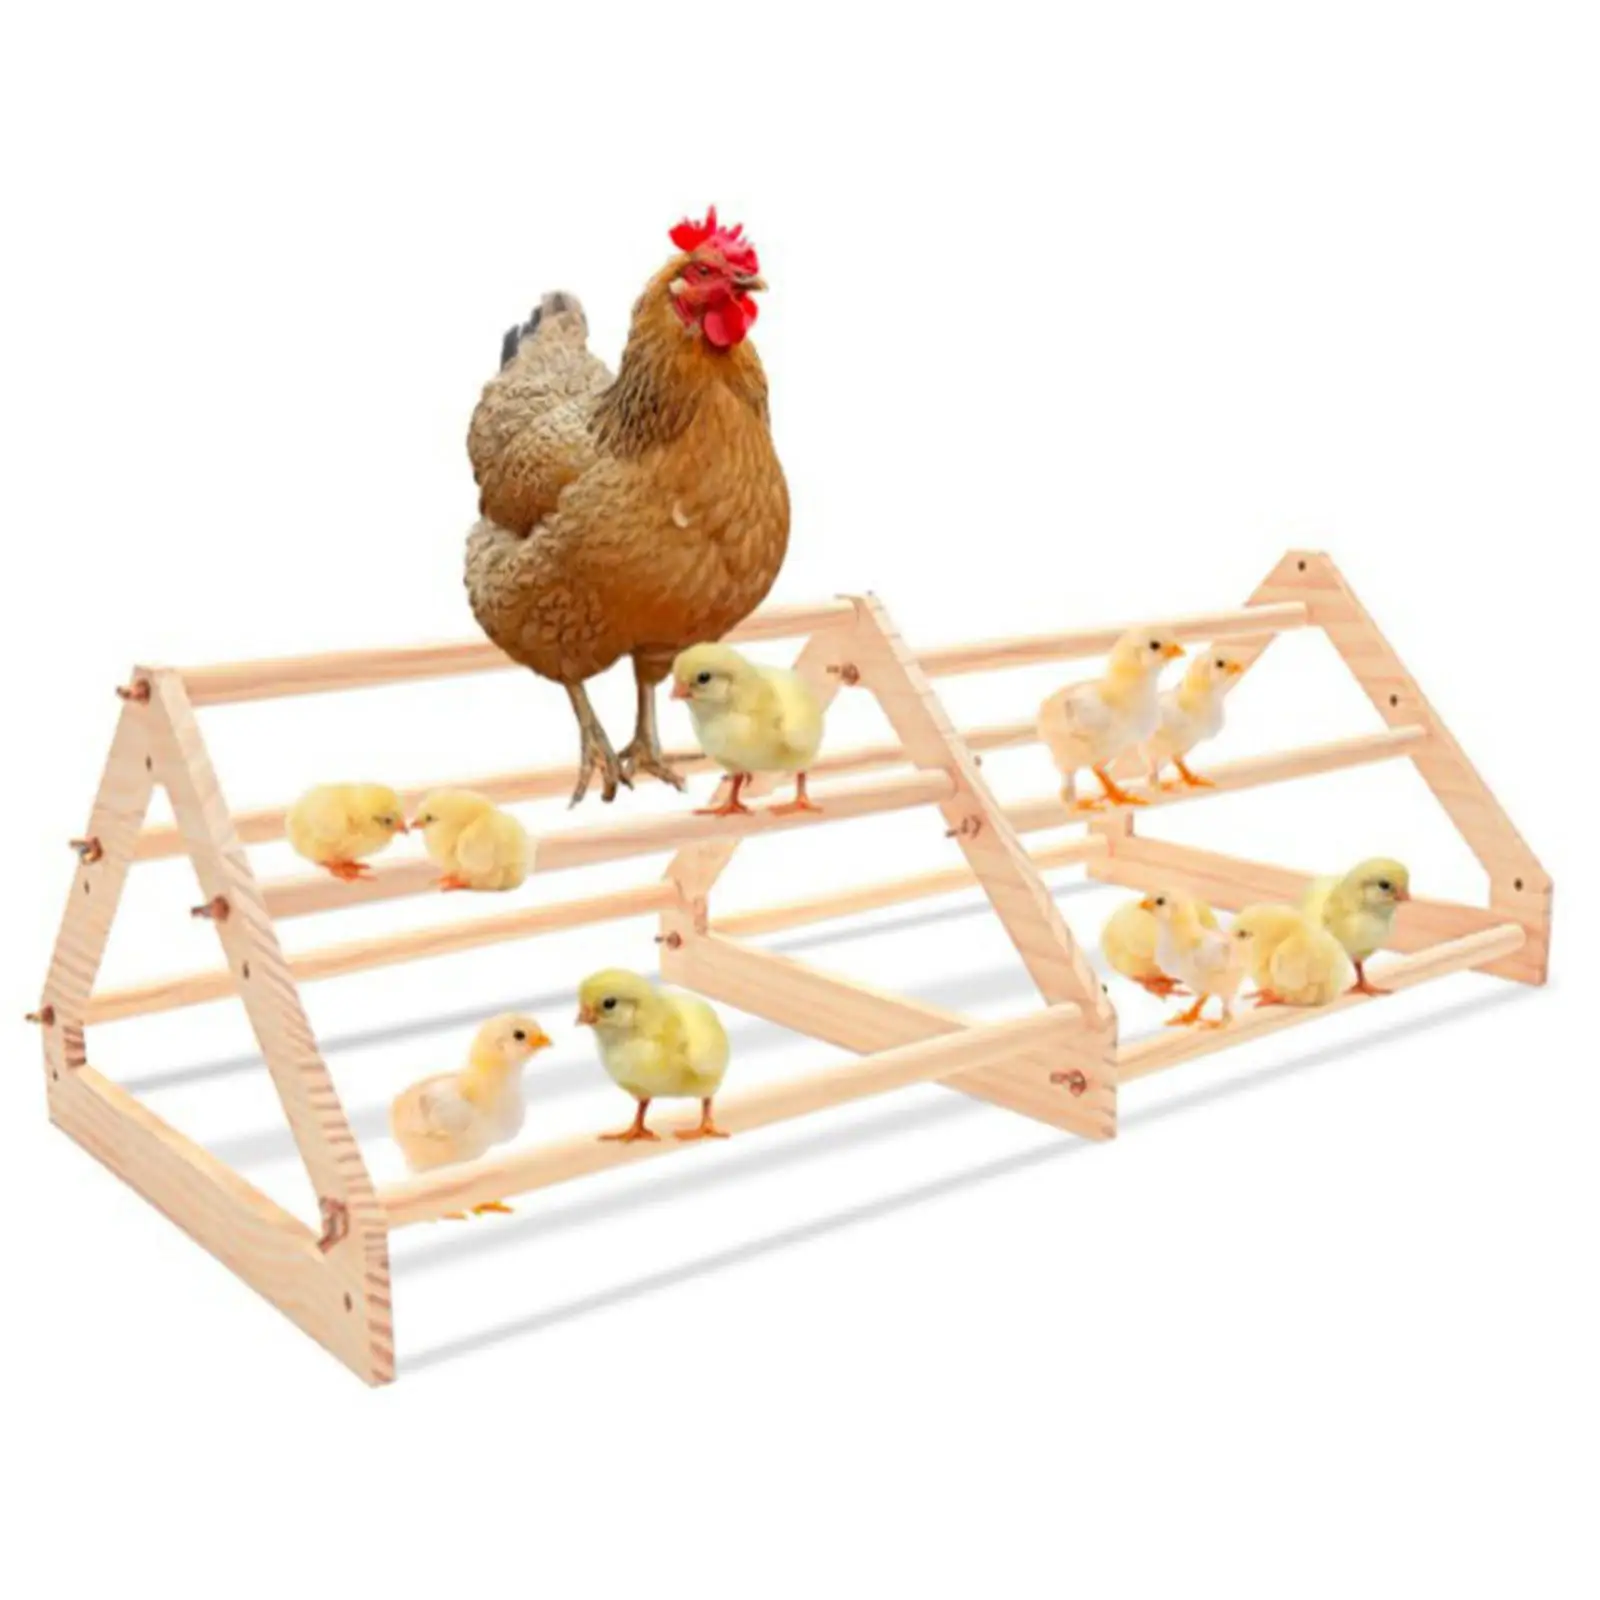 

Wooden Chicken Roosts Chick Supplies Toy for Hens Stand Holder Macaw Roosting Bar 3-layer Handmade Coop and Brooder Chick Perch